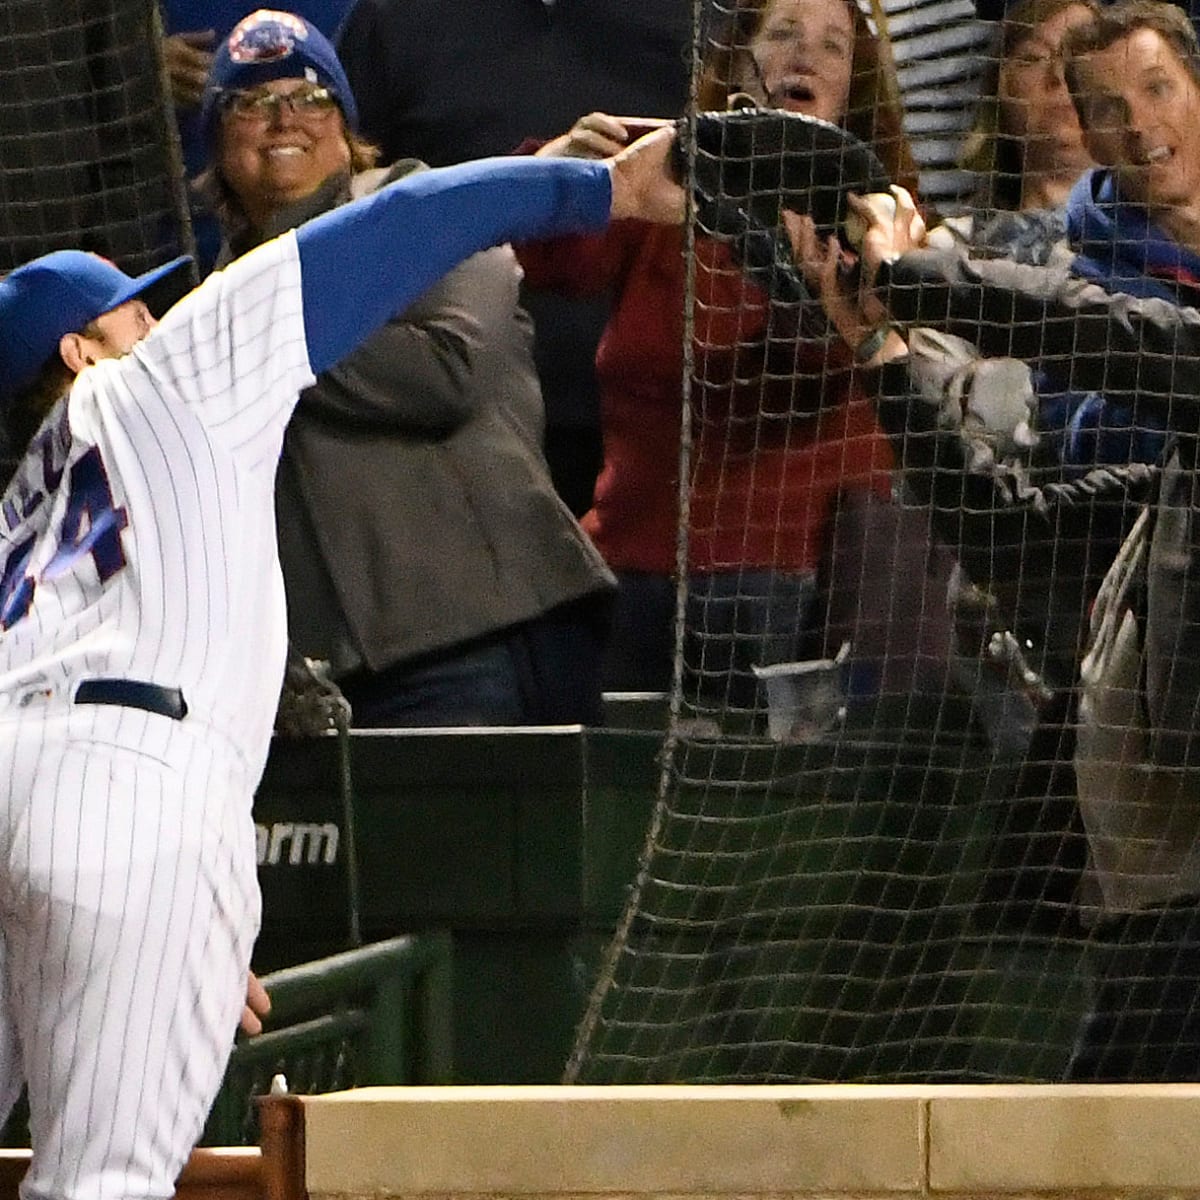 Cubs vs Pirates: Fan interferes with Anthony Rizzo (video